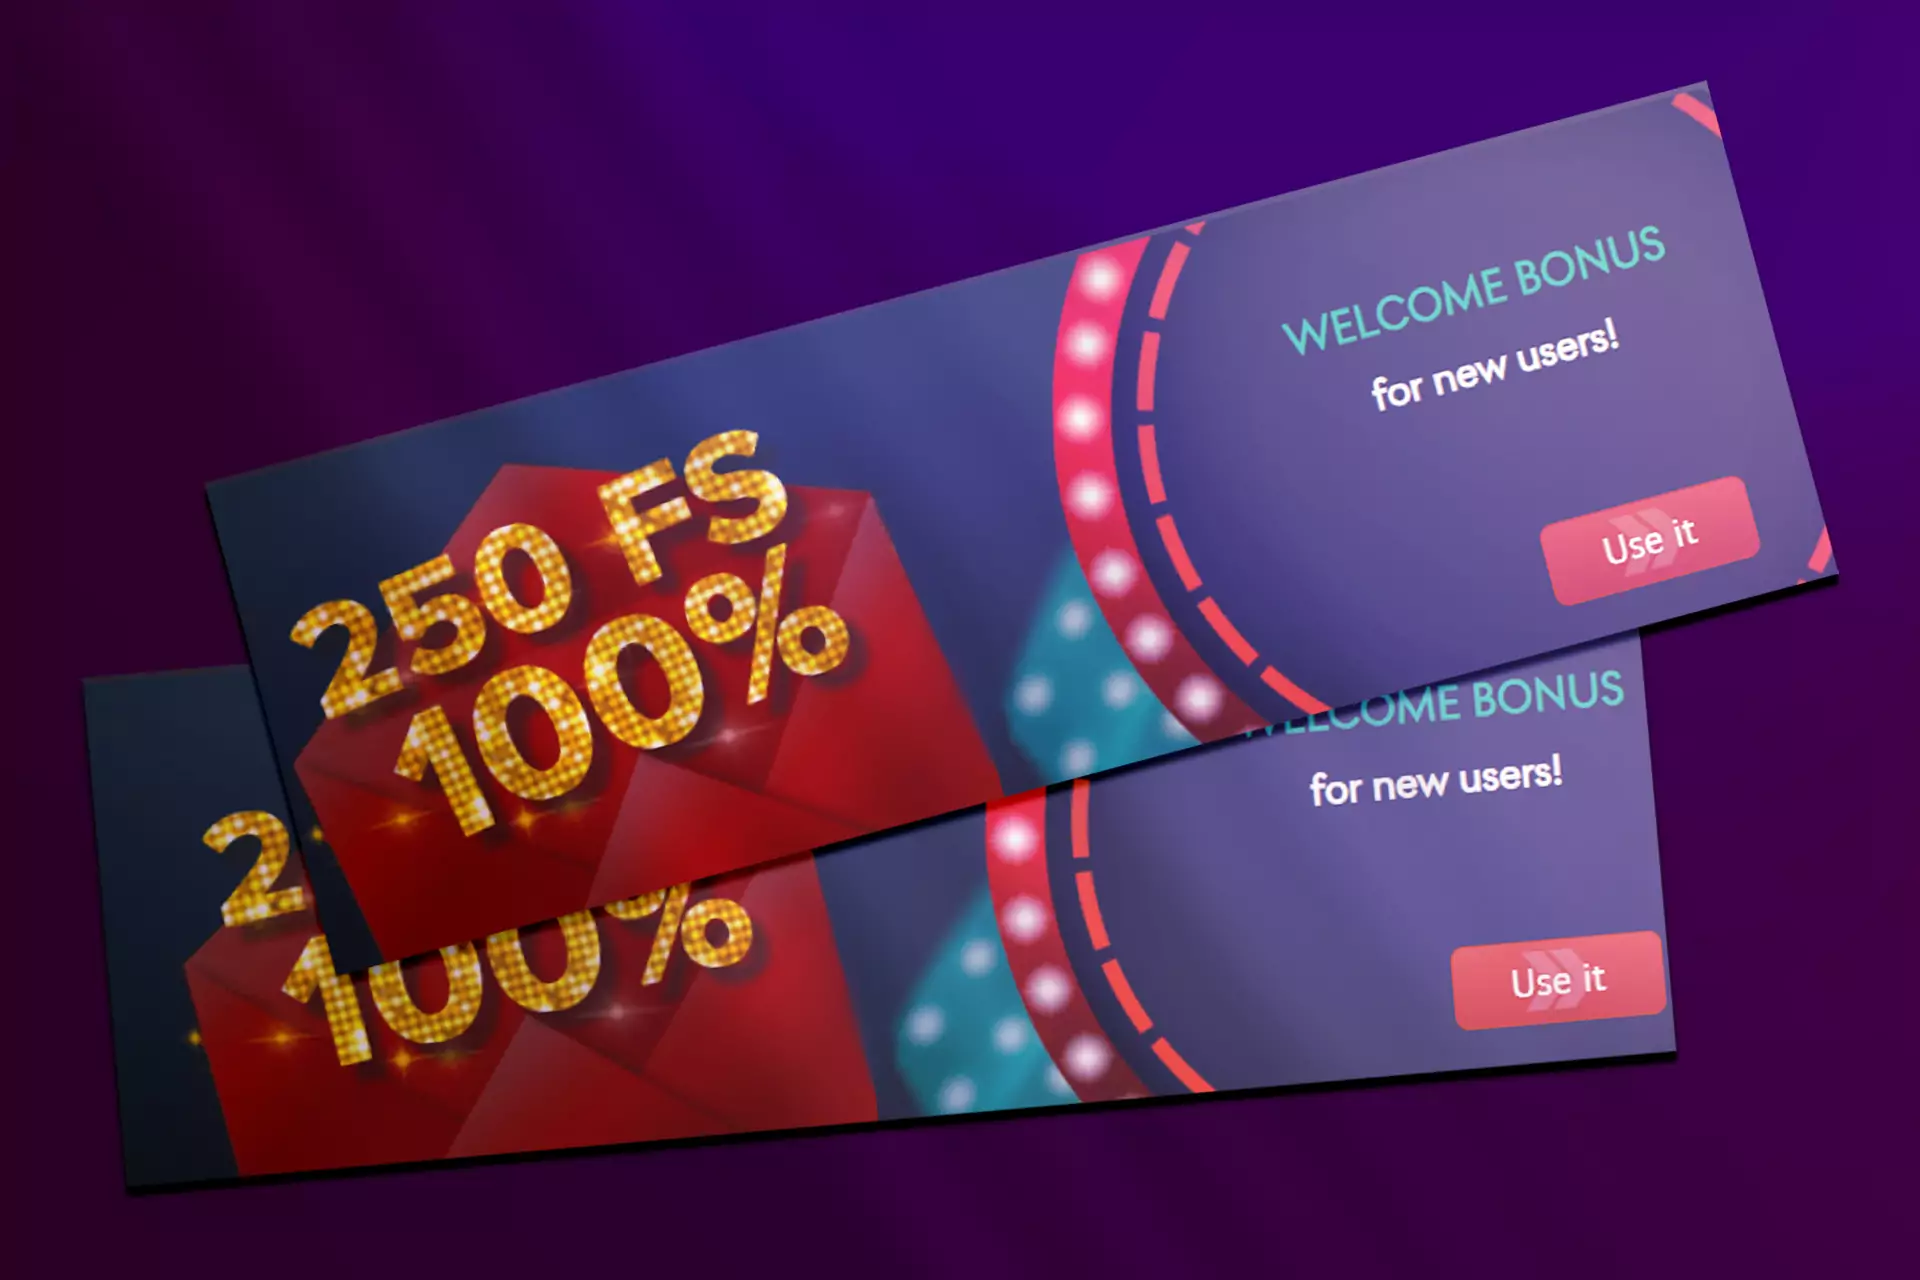 If you are a new user, don't miss the chance to get the welcome offer.